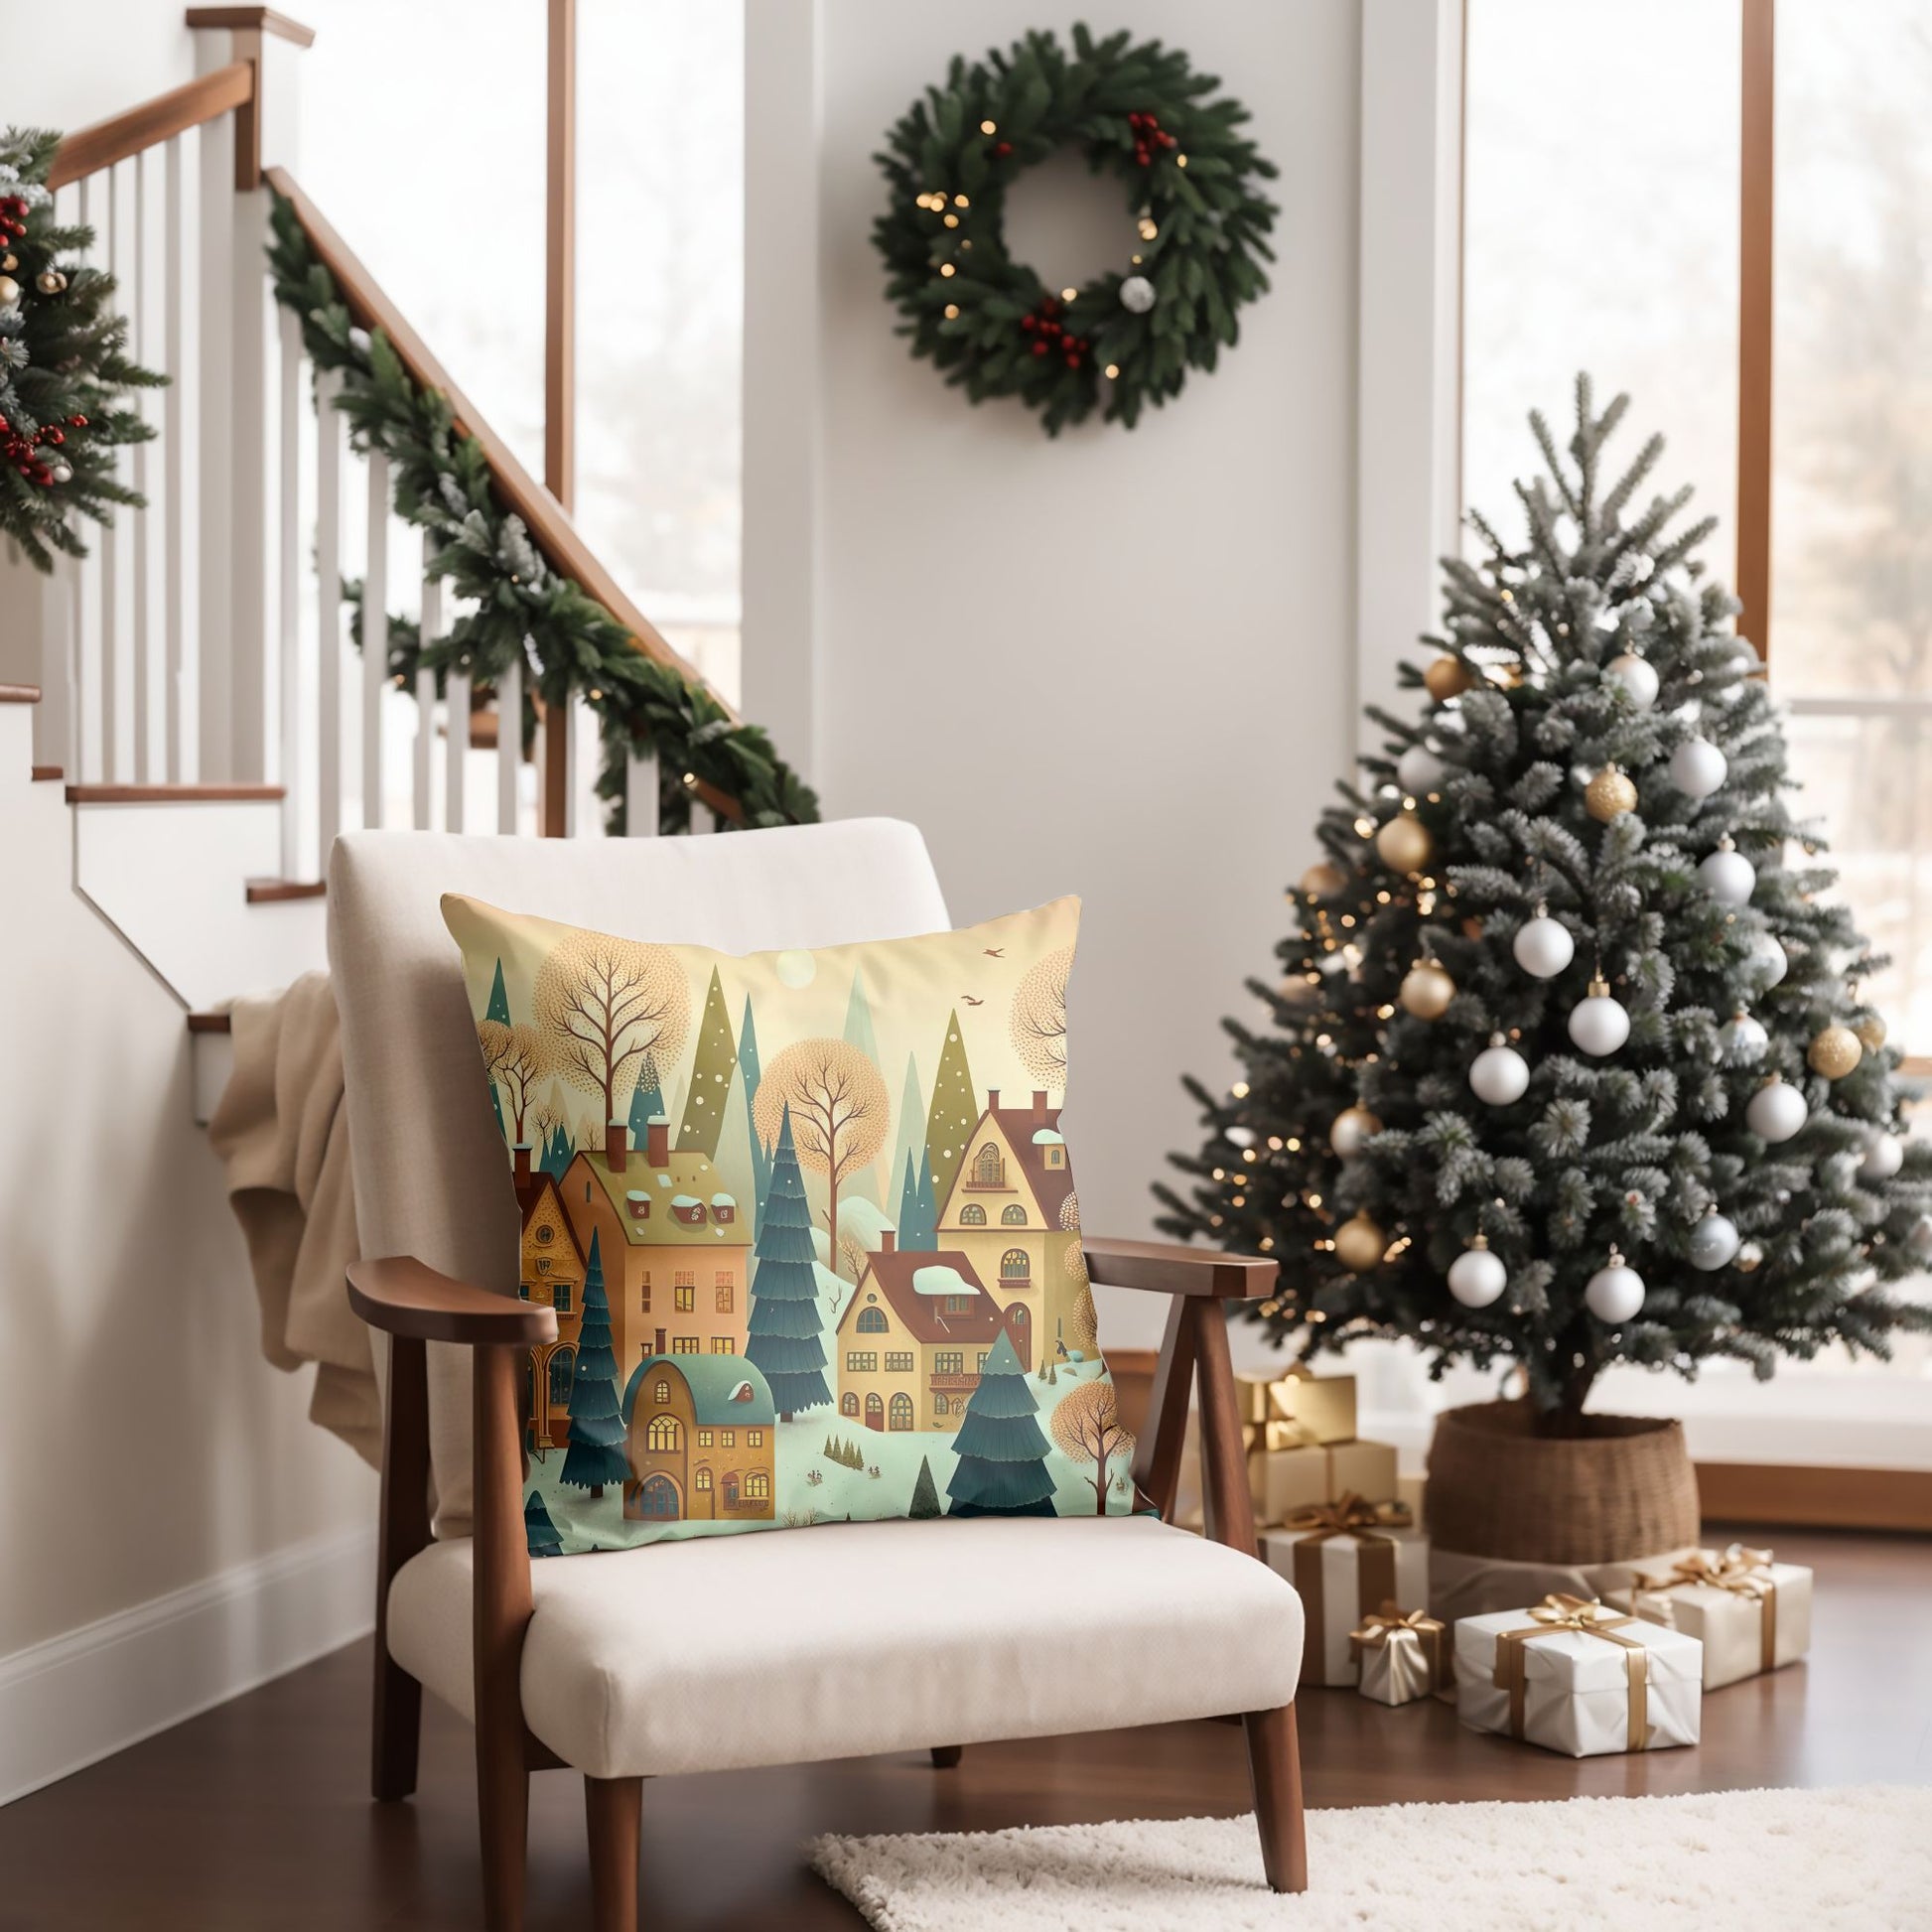 Cozy Holiday Atmosphere in a Decorative Pillow